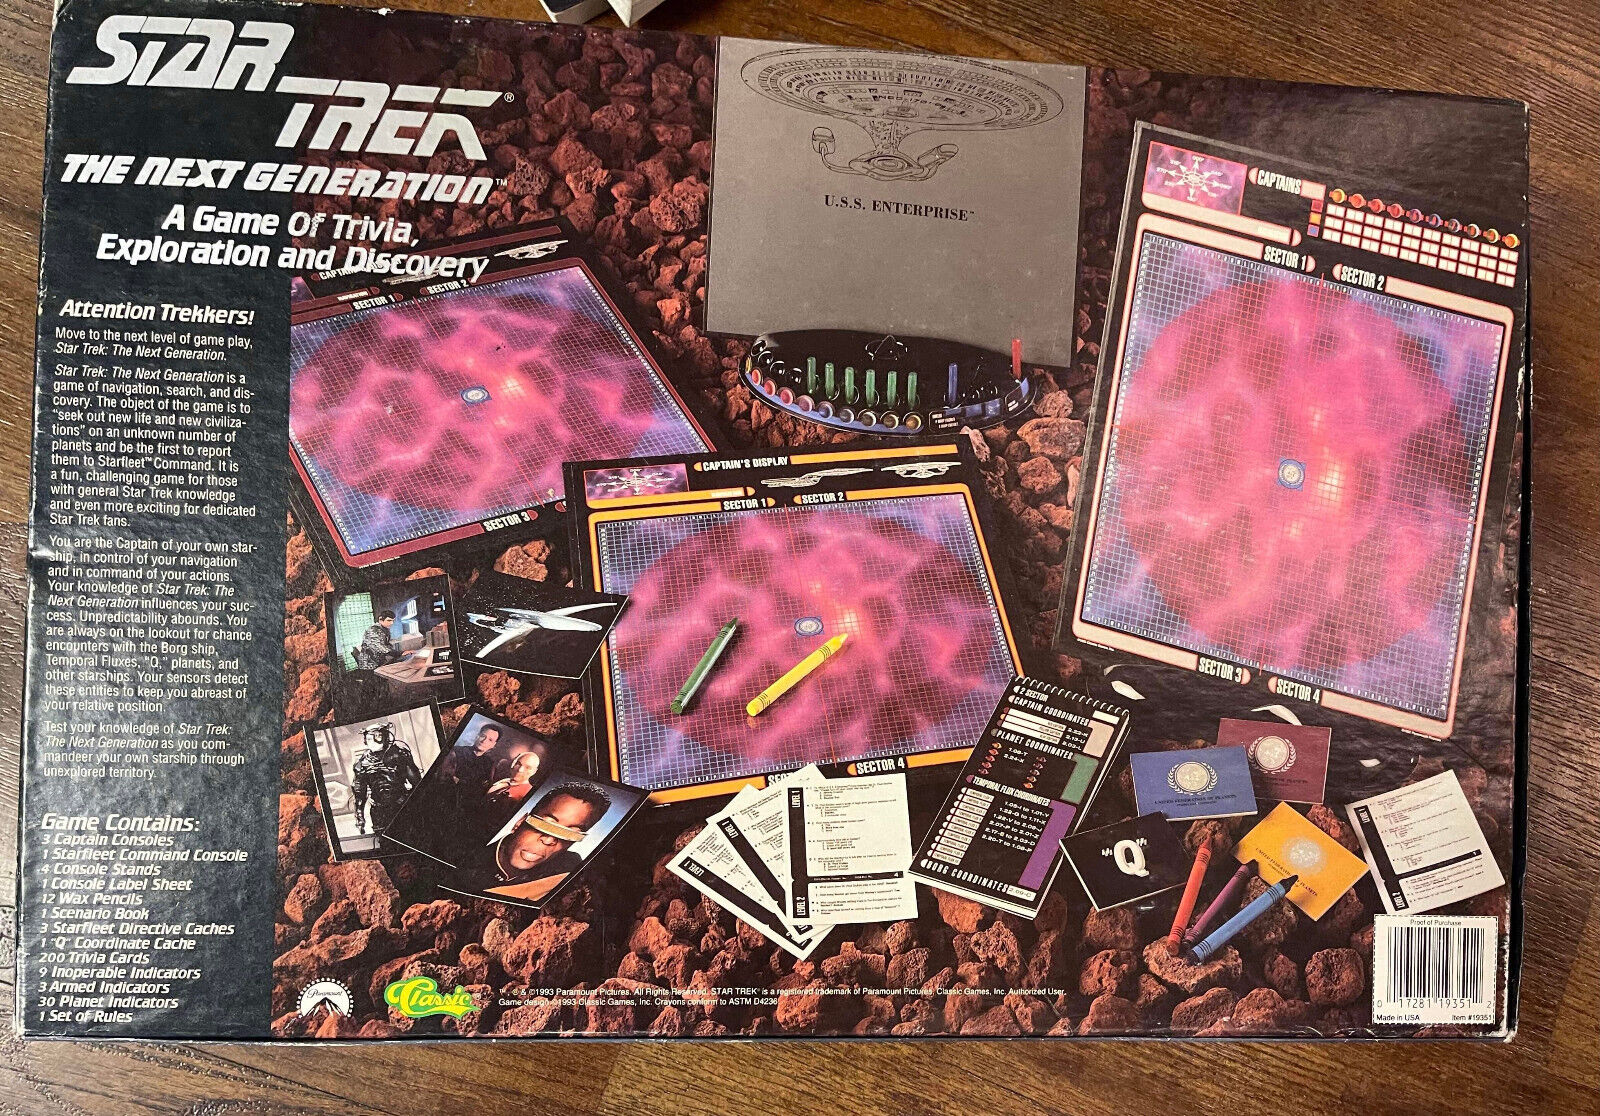 1993 Star Trek The Next Generation A Game of Trivia Exploration and Discovery